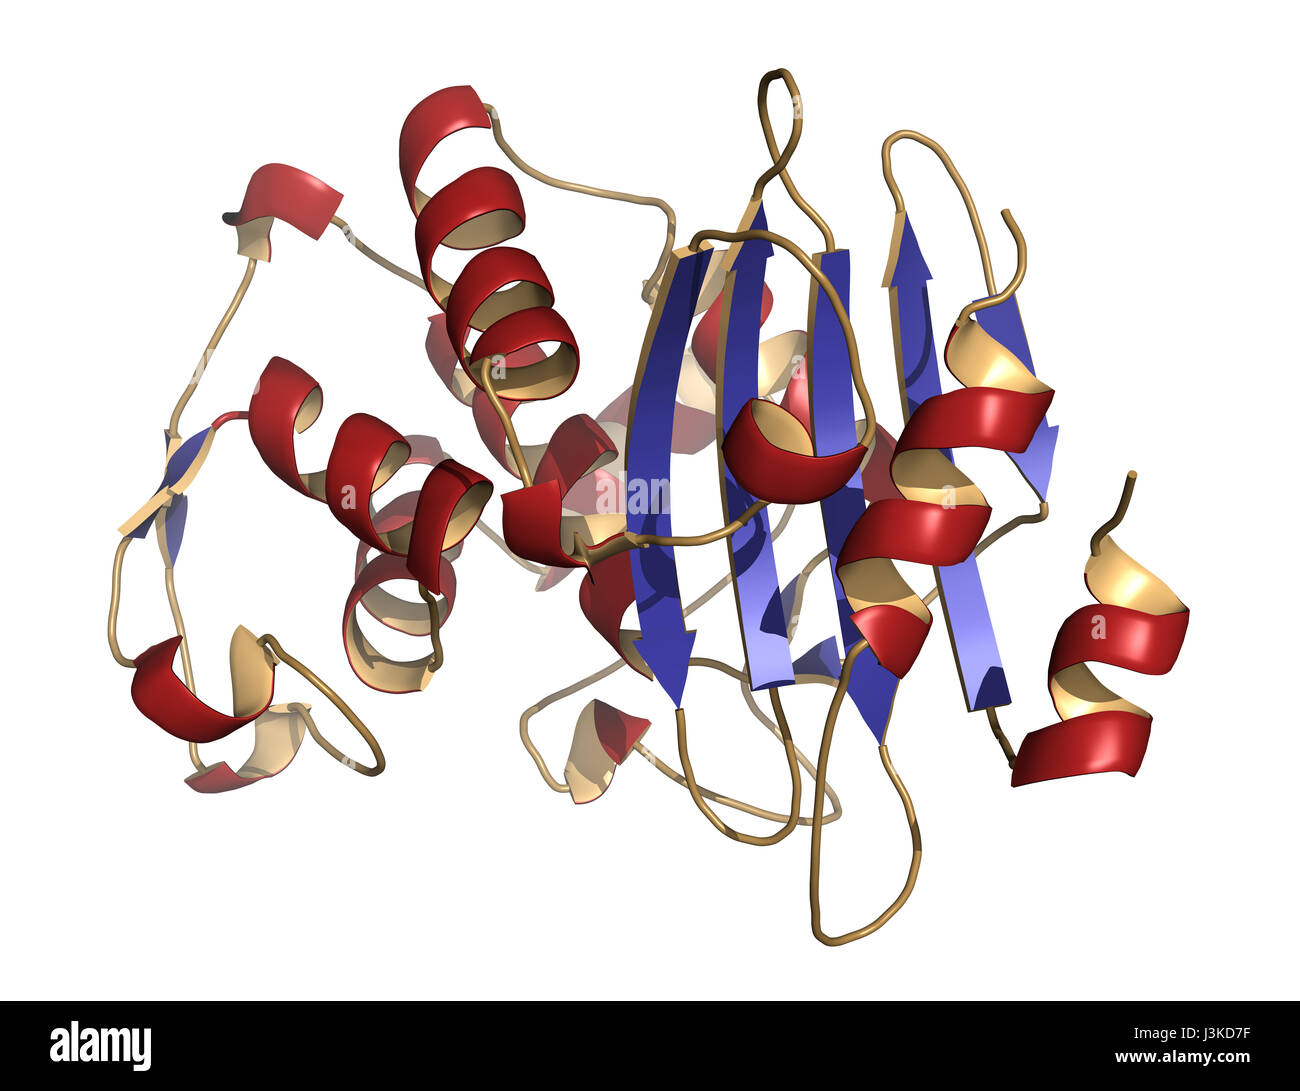 Beta-lactamase enzyme from Staphylococcus aureus. Responsible for resistance against penicillin and related antibiotics. Cartoon model, secondary stru Stock Photo